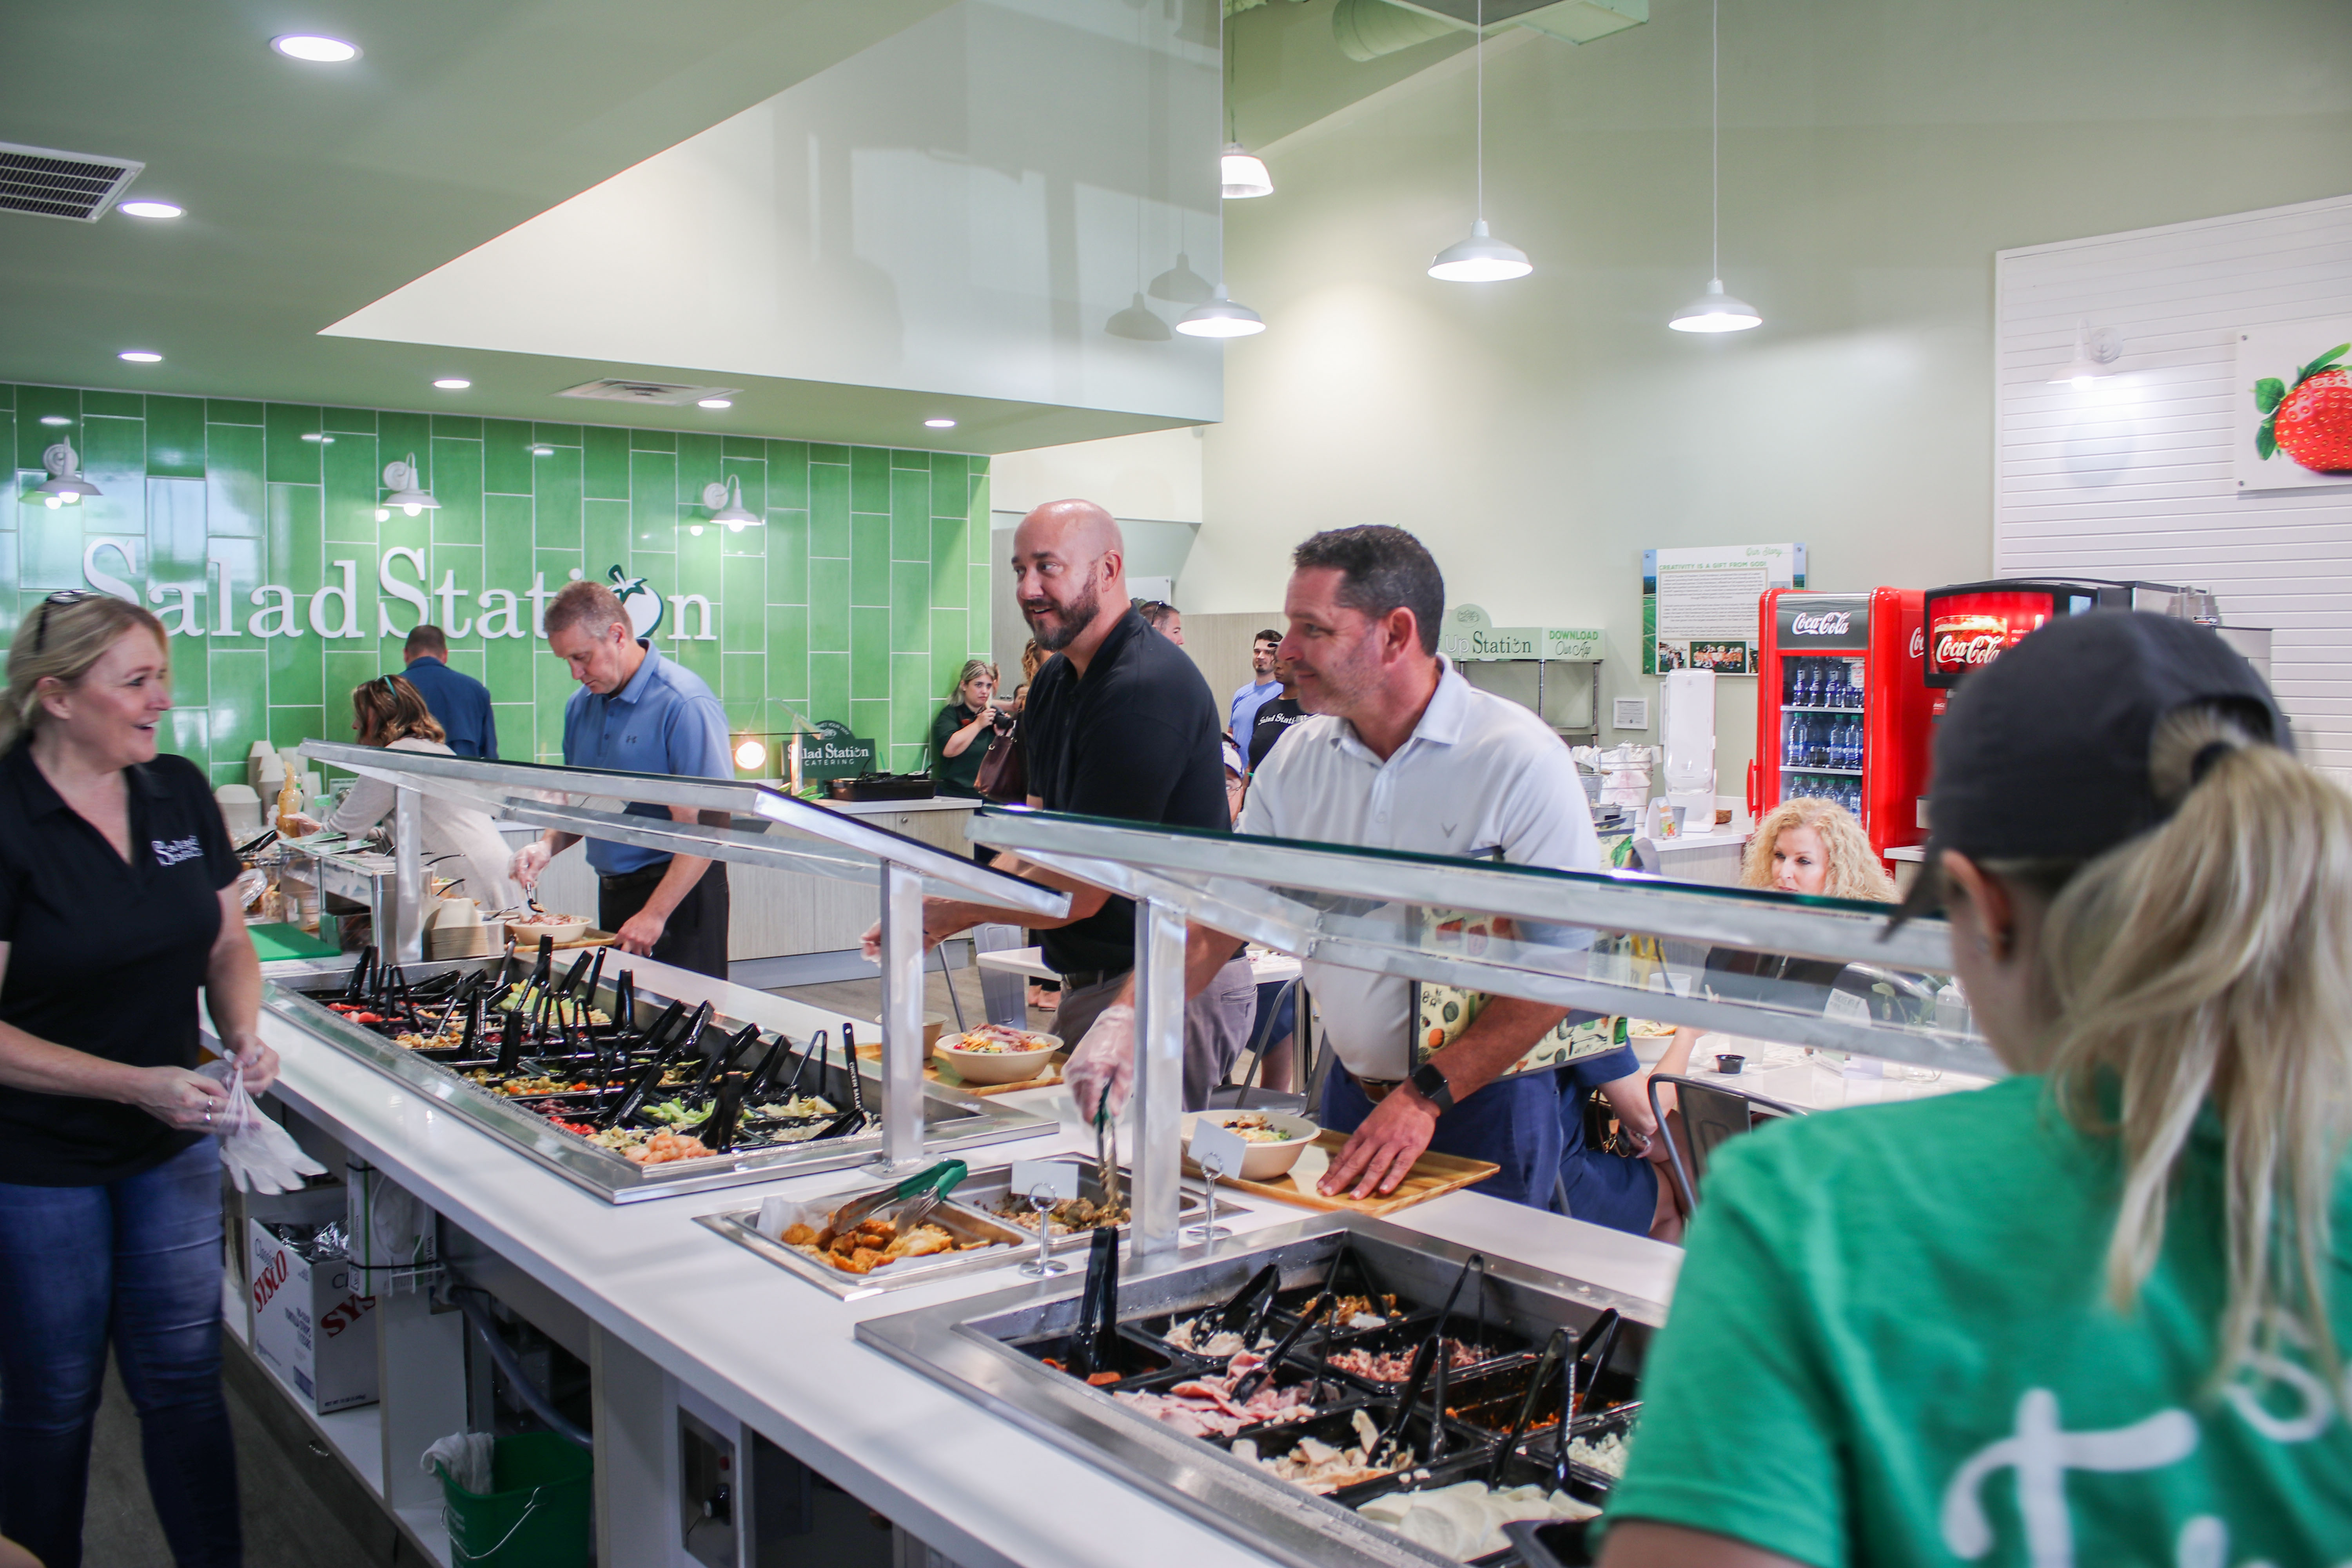 How The Salad Station exceeded its own growth expectations